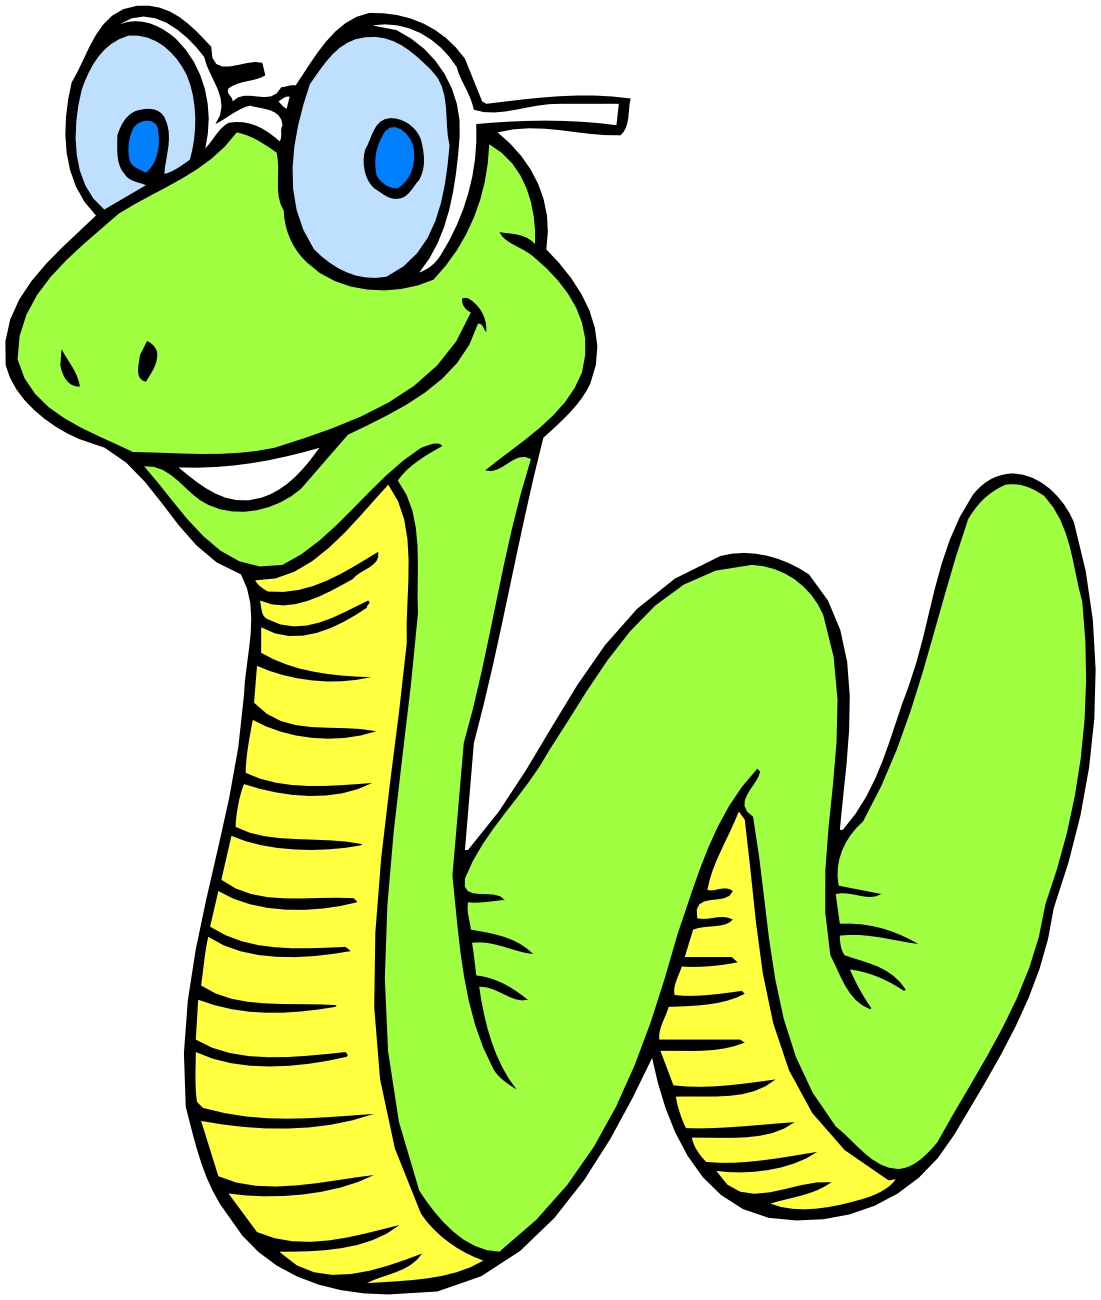 Worm Cartoon Images   Free Cliparts That You Can Download To You